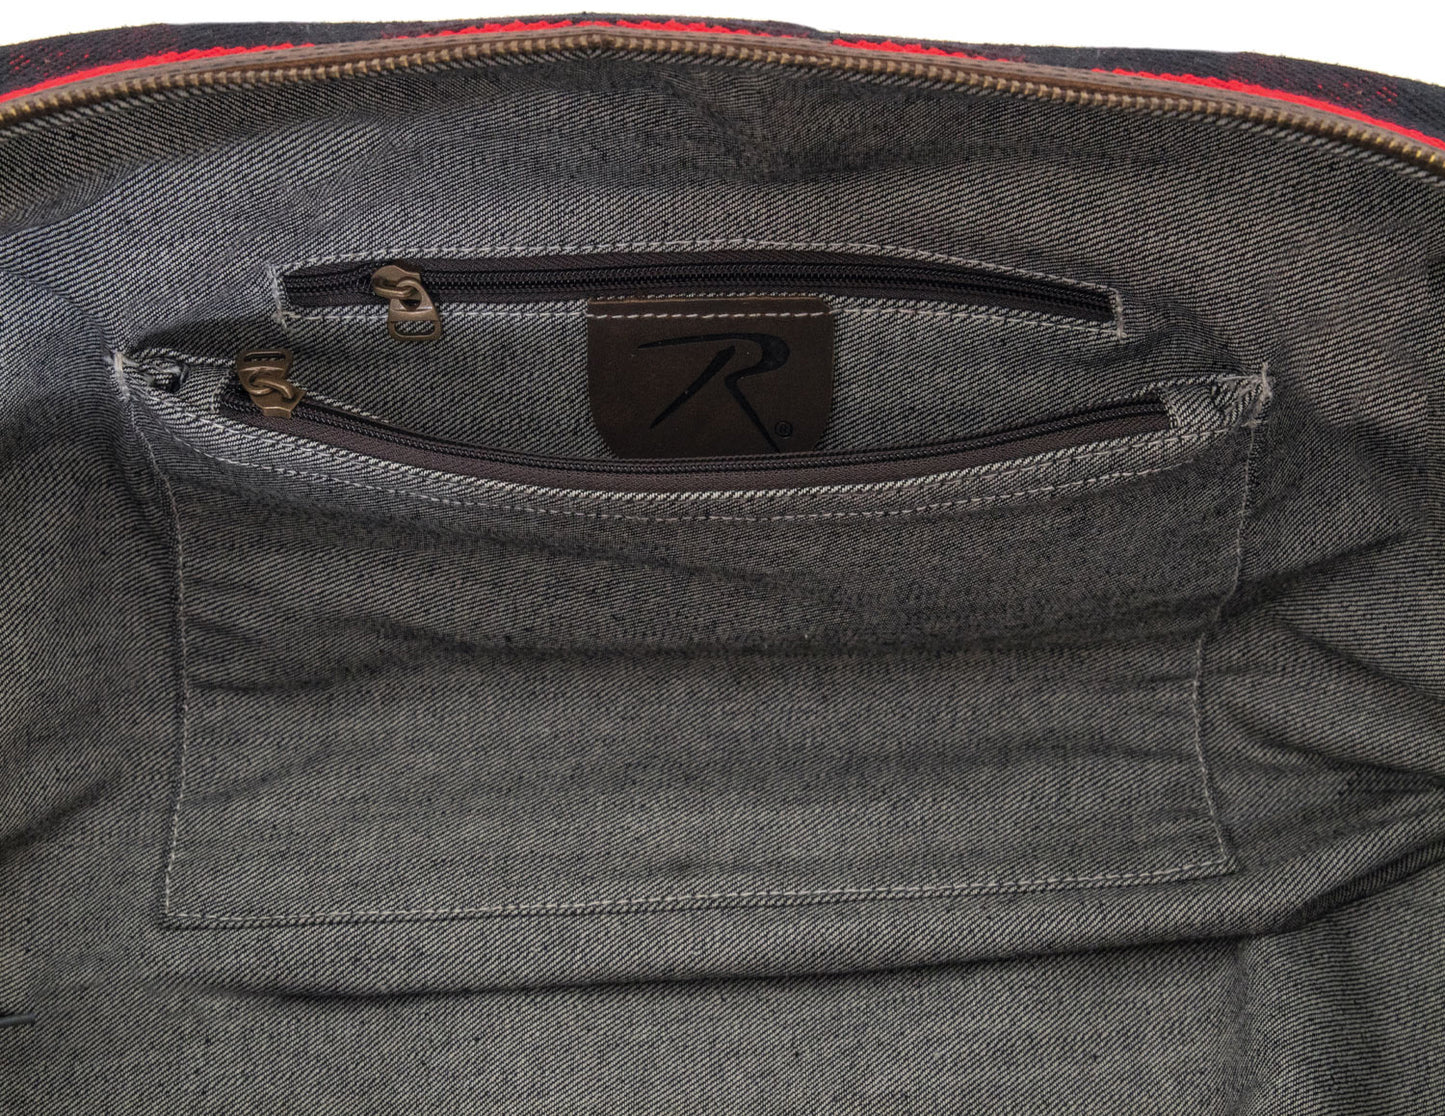 Rothco Extended Weekender Travel Bag